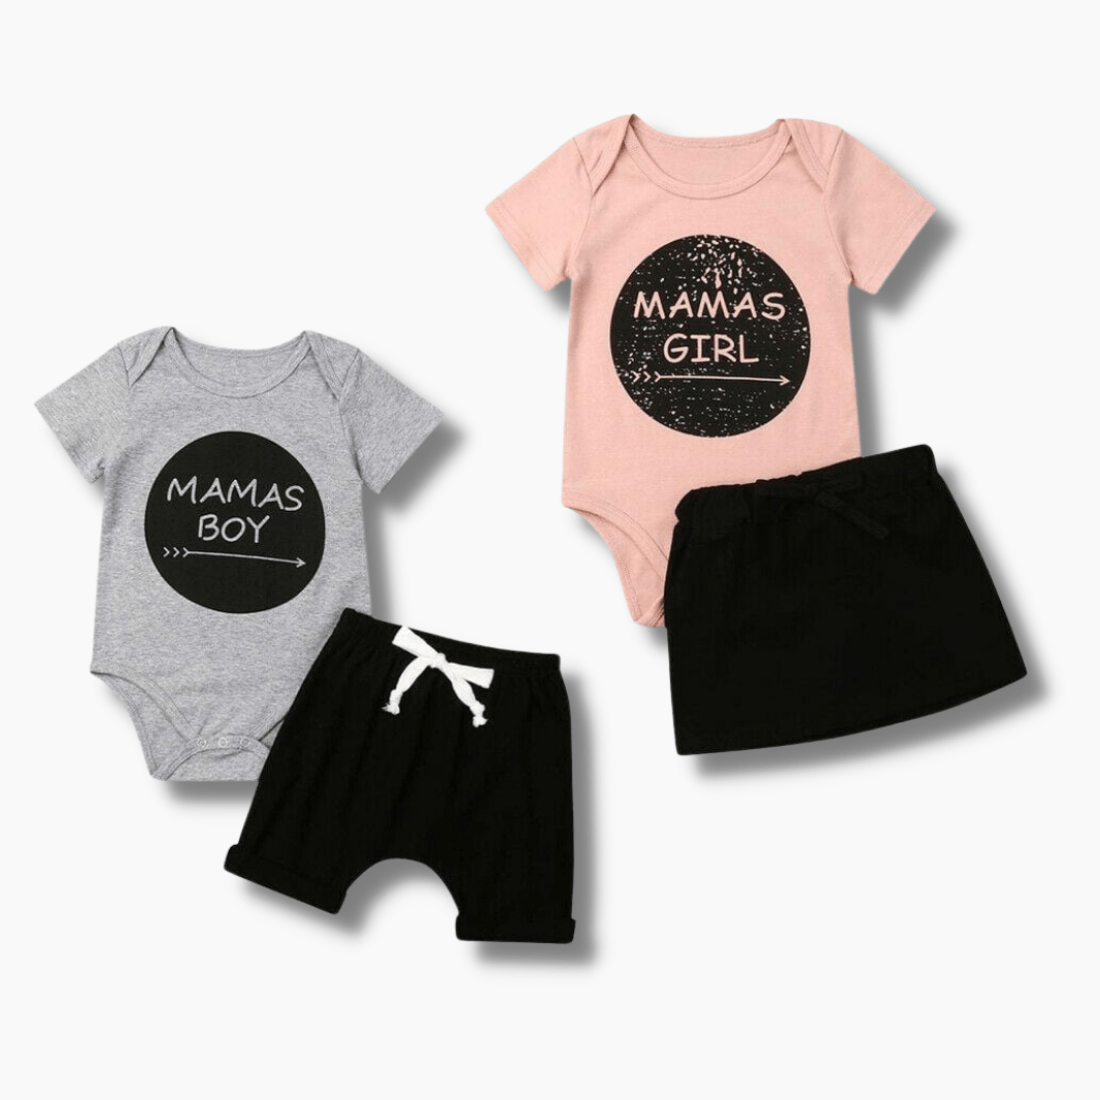 Girl's Clothing Mamas Boy Girl/Boy Romper Outfit